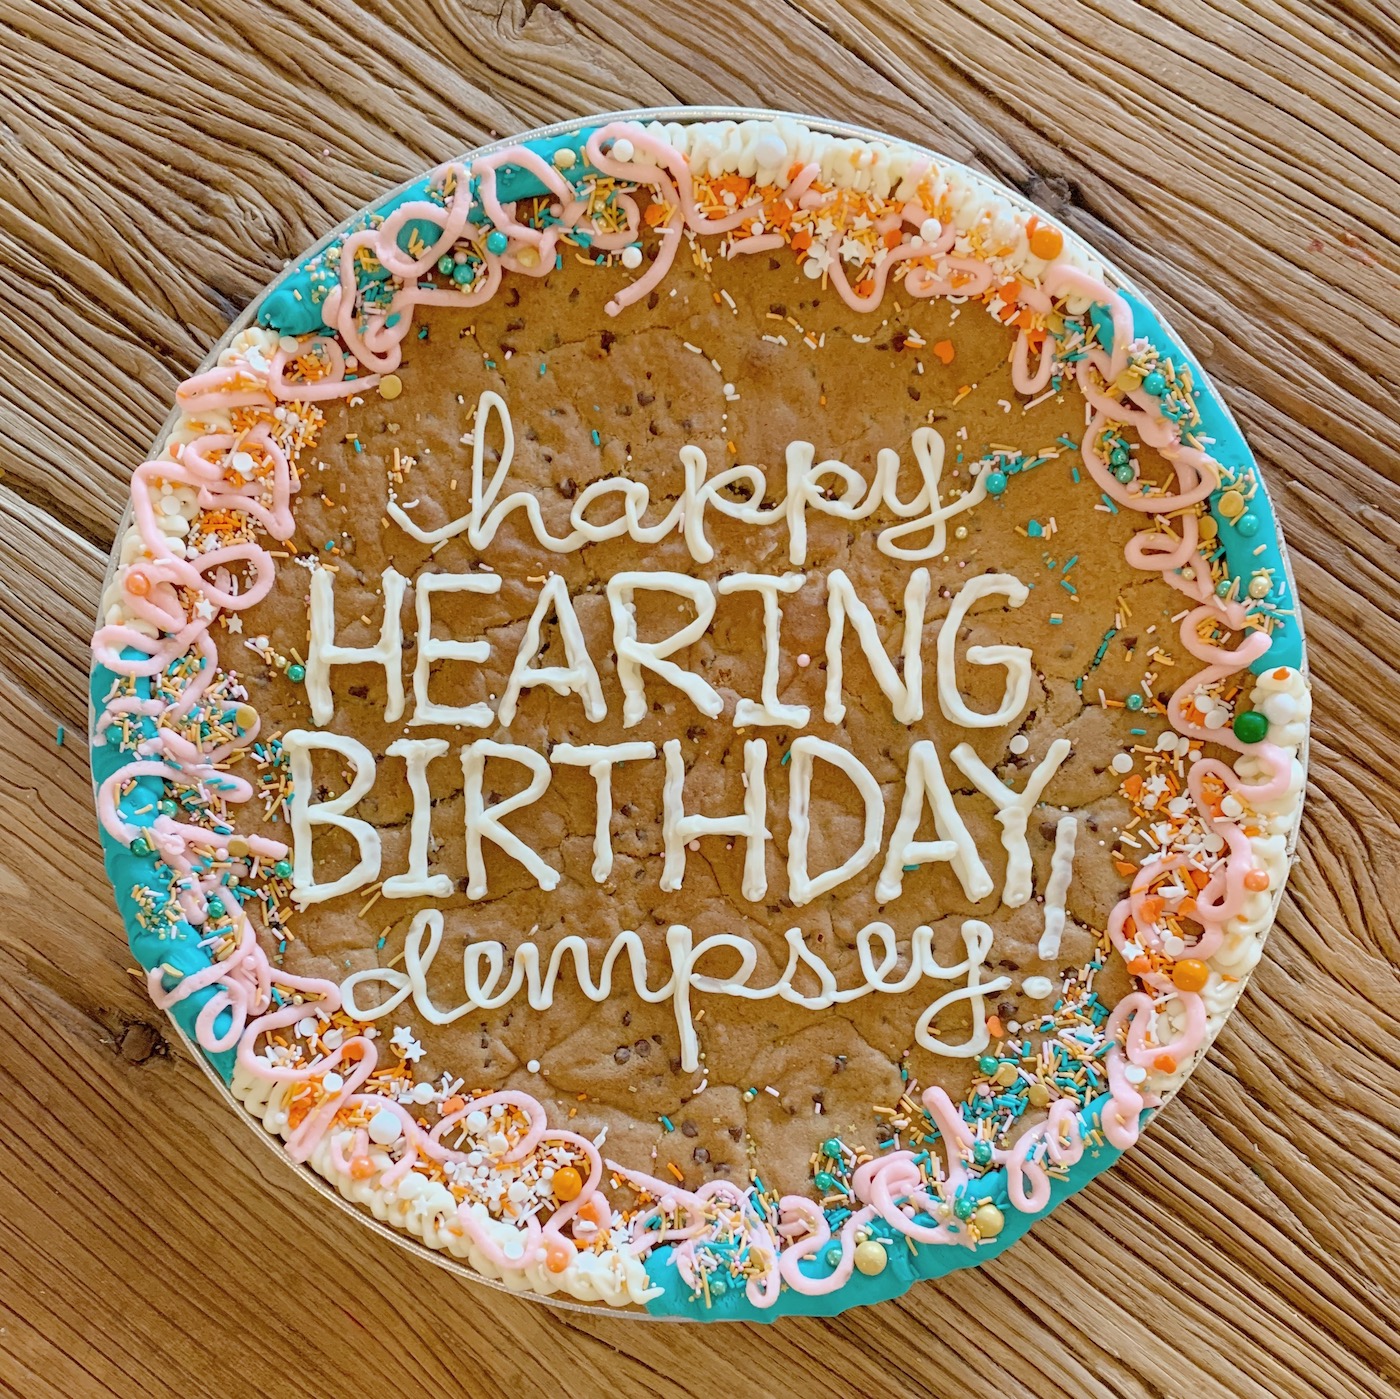 Dempsey's Hearing Birthday. His cochlear implants have been turned on for one whole year now! 